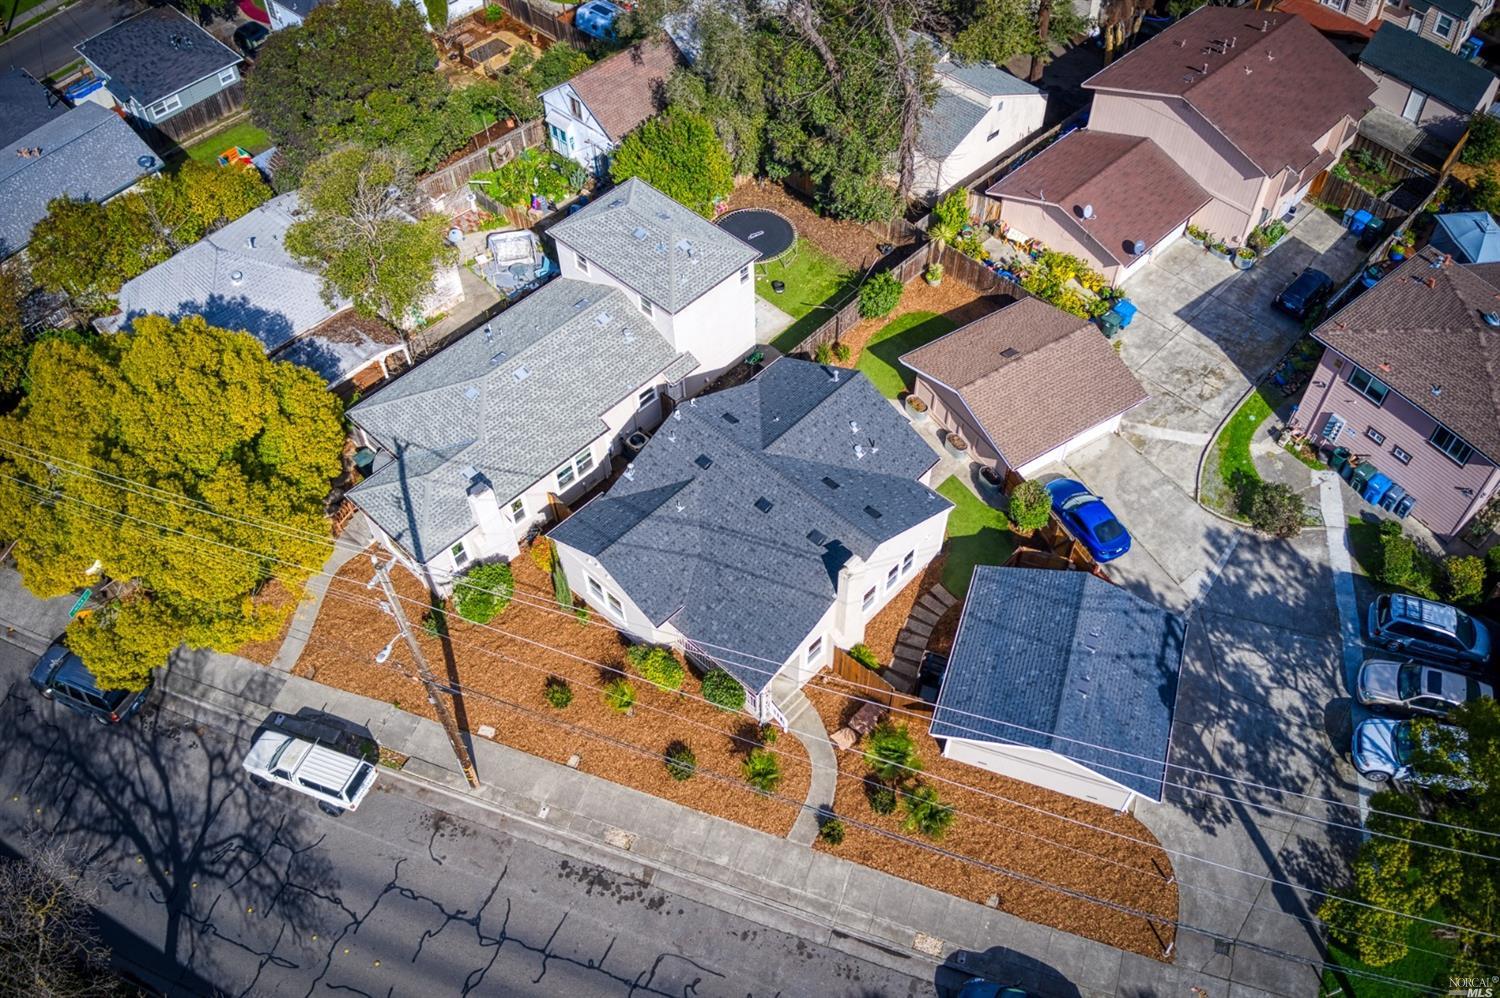 Aerial photo (from left to right) of 926 Morgan St., 924 Morgan St., and the attached 2 individual garages (lower right).